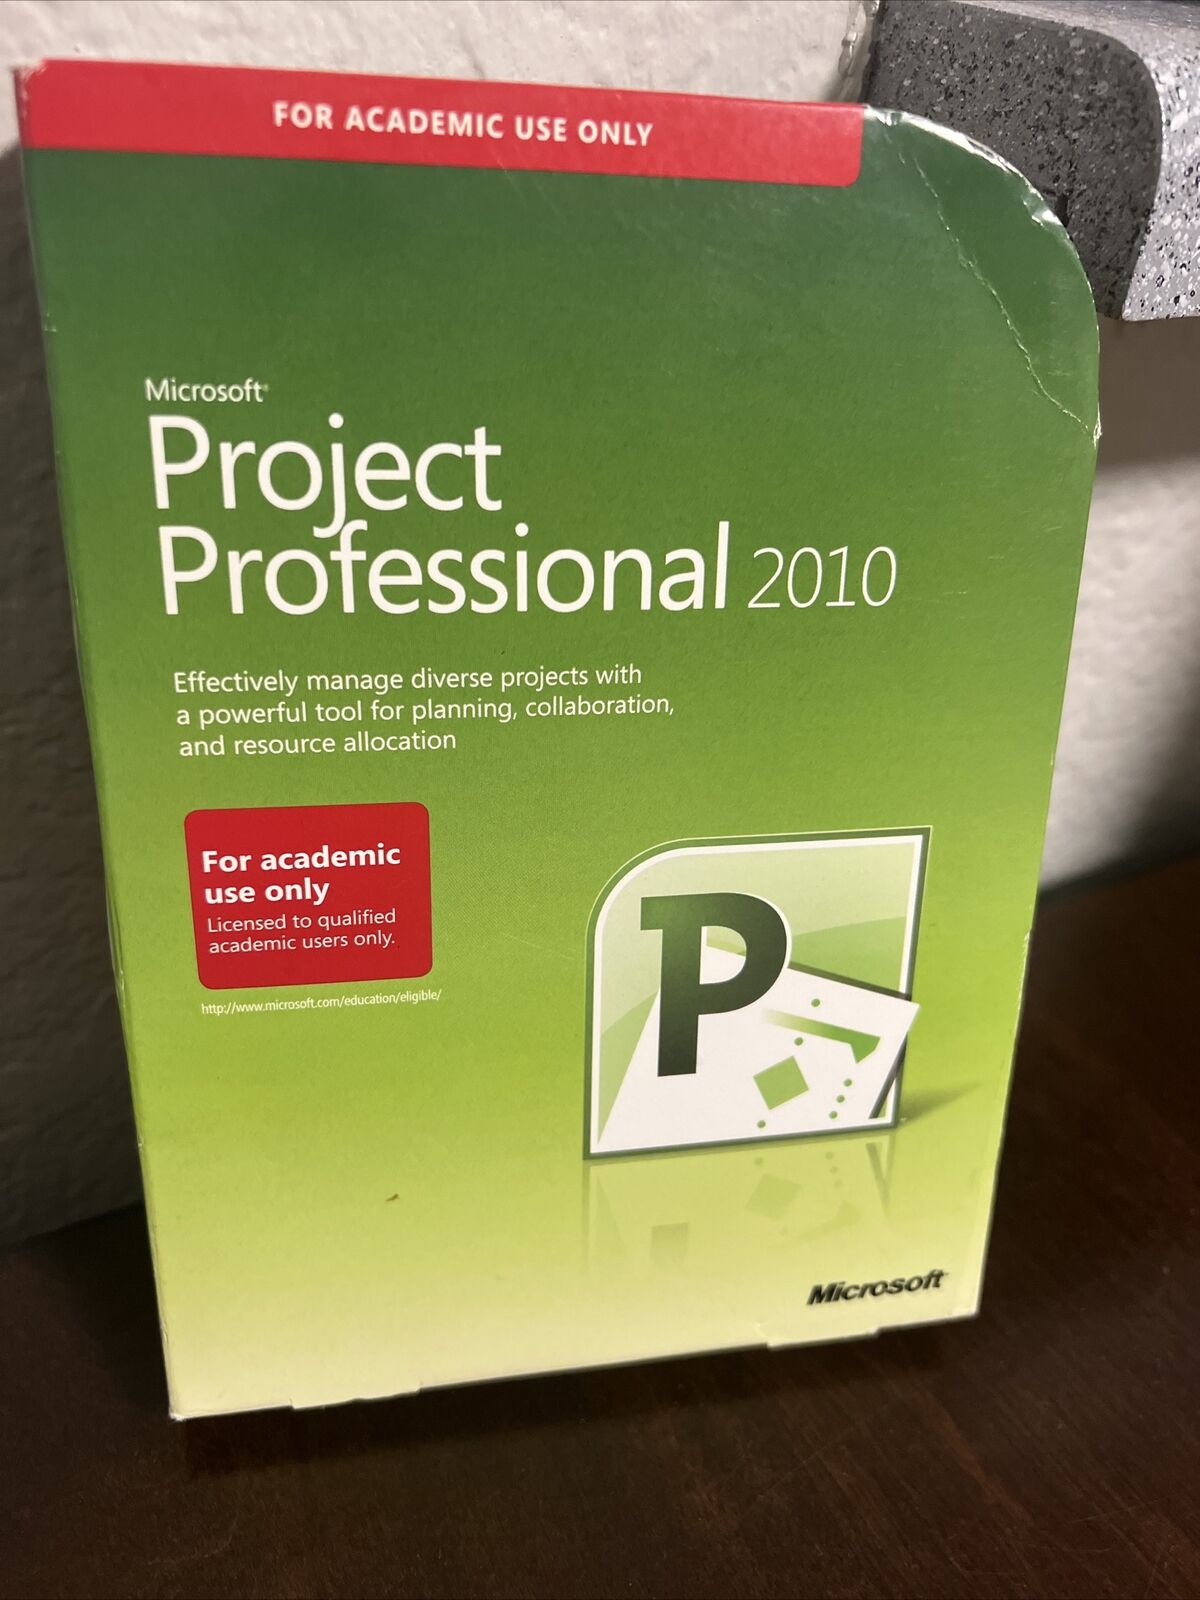 Microsoft Project 2010 Professional For 2 PCs Full Academic Version =RETAIL BOX=